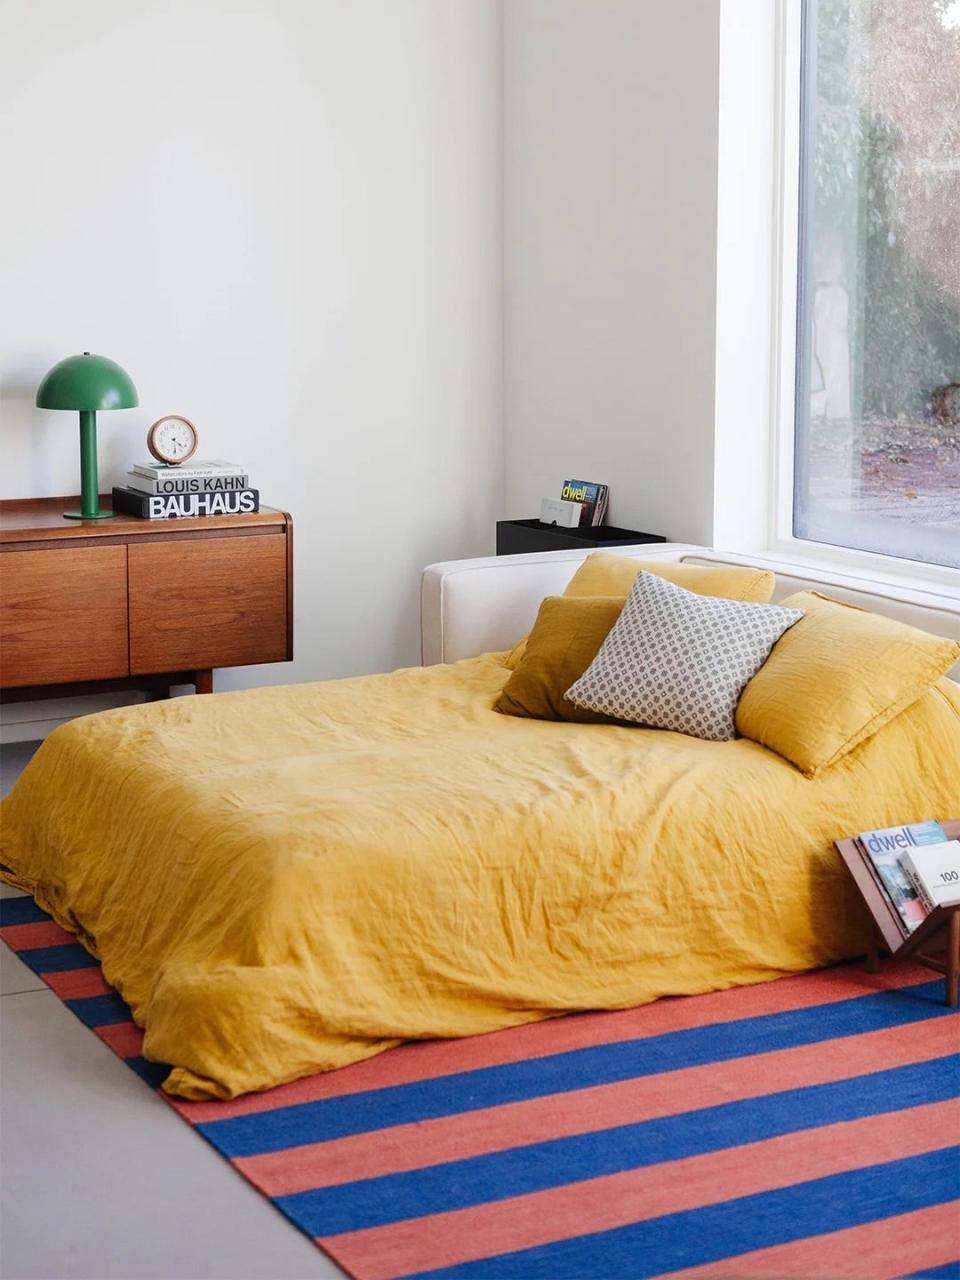 Bed with yellow bedspread and striped rug.